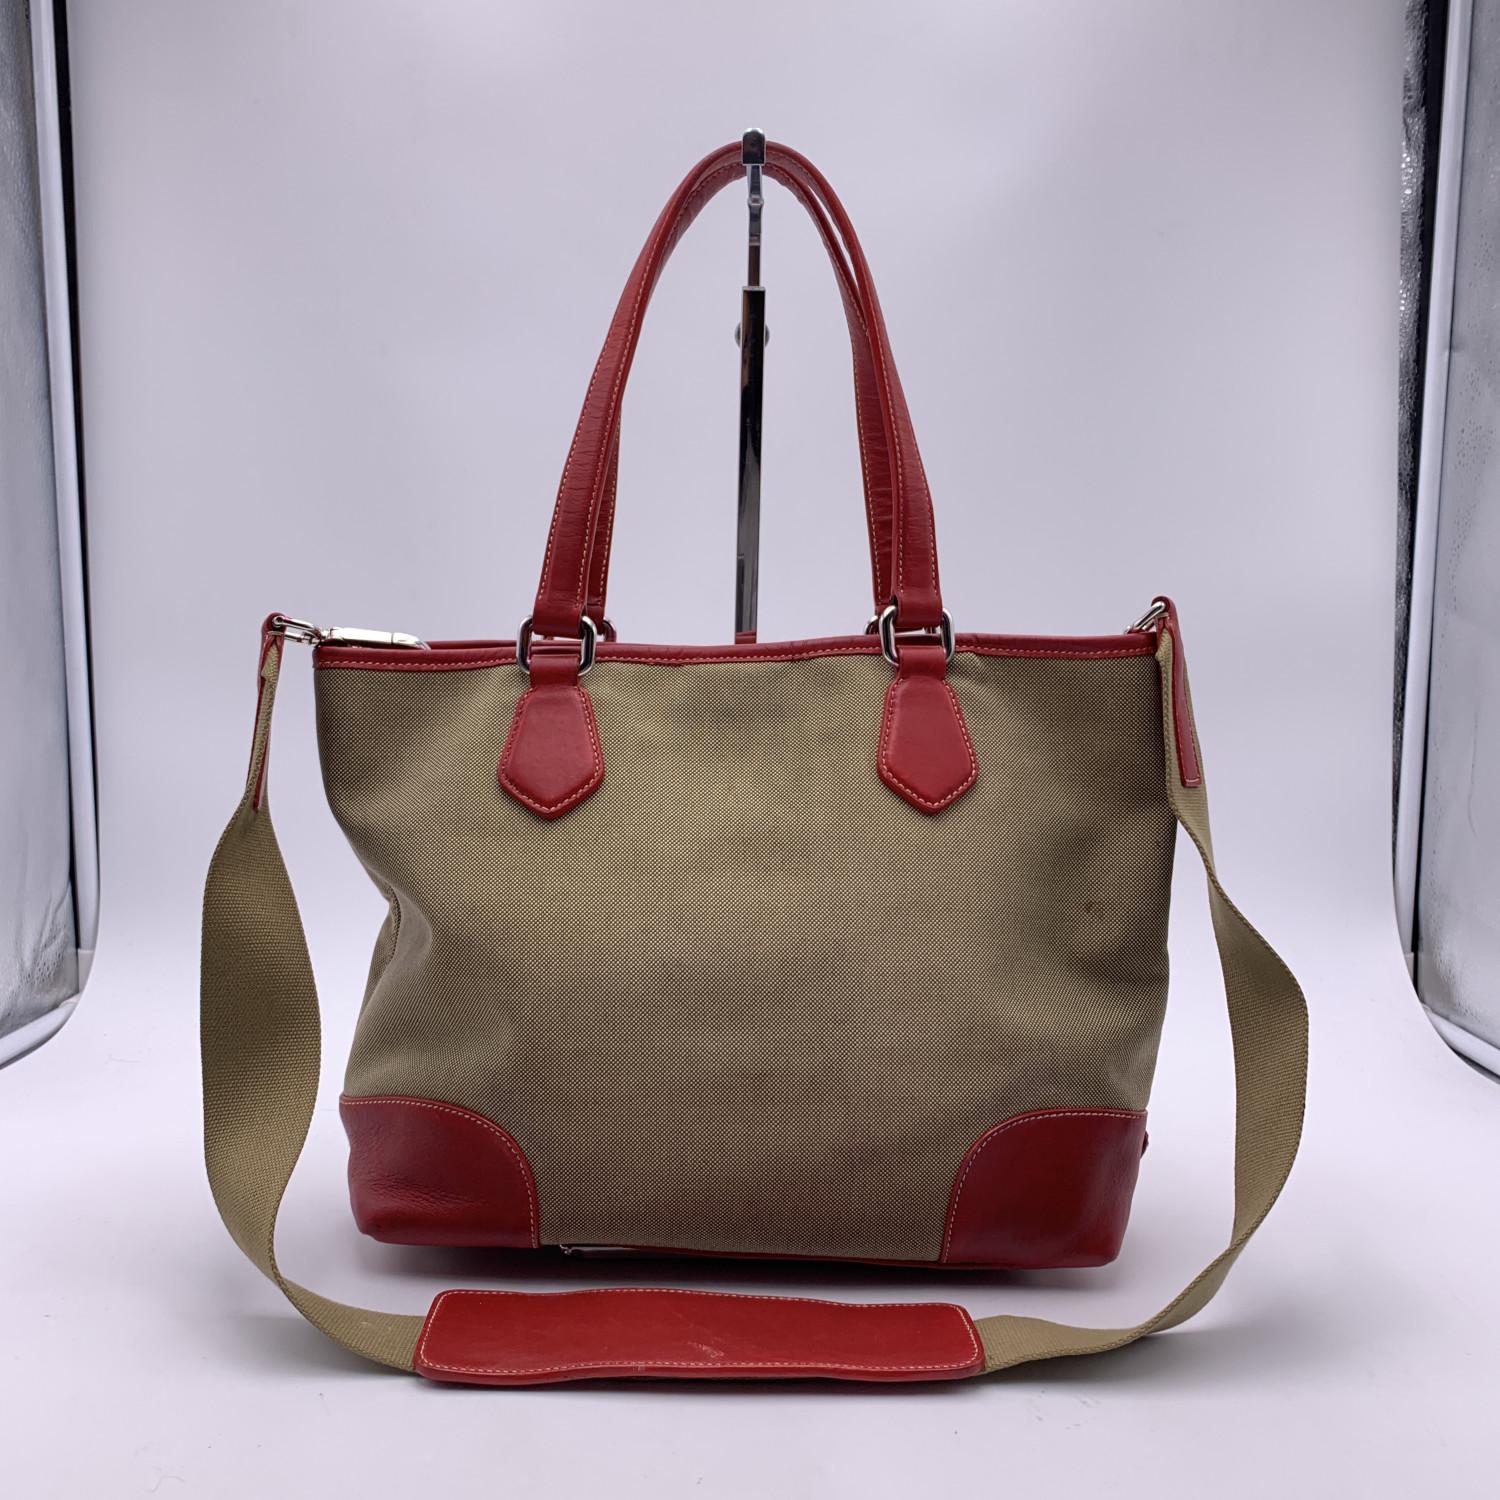 PRADA jacquard logo tote bag. Contemporary design and an edgy bold look. Beige canvas and red leather trim. Magnetic button closure on top. Silver metal hardware. PRADA signature lining . 1 side zip pocket inside. Removable canvas shoulder strap.